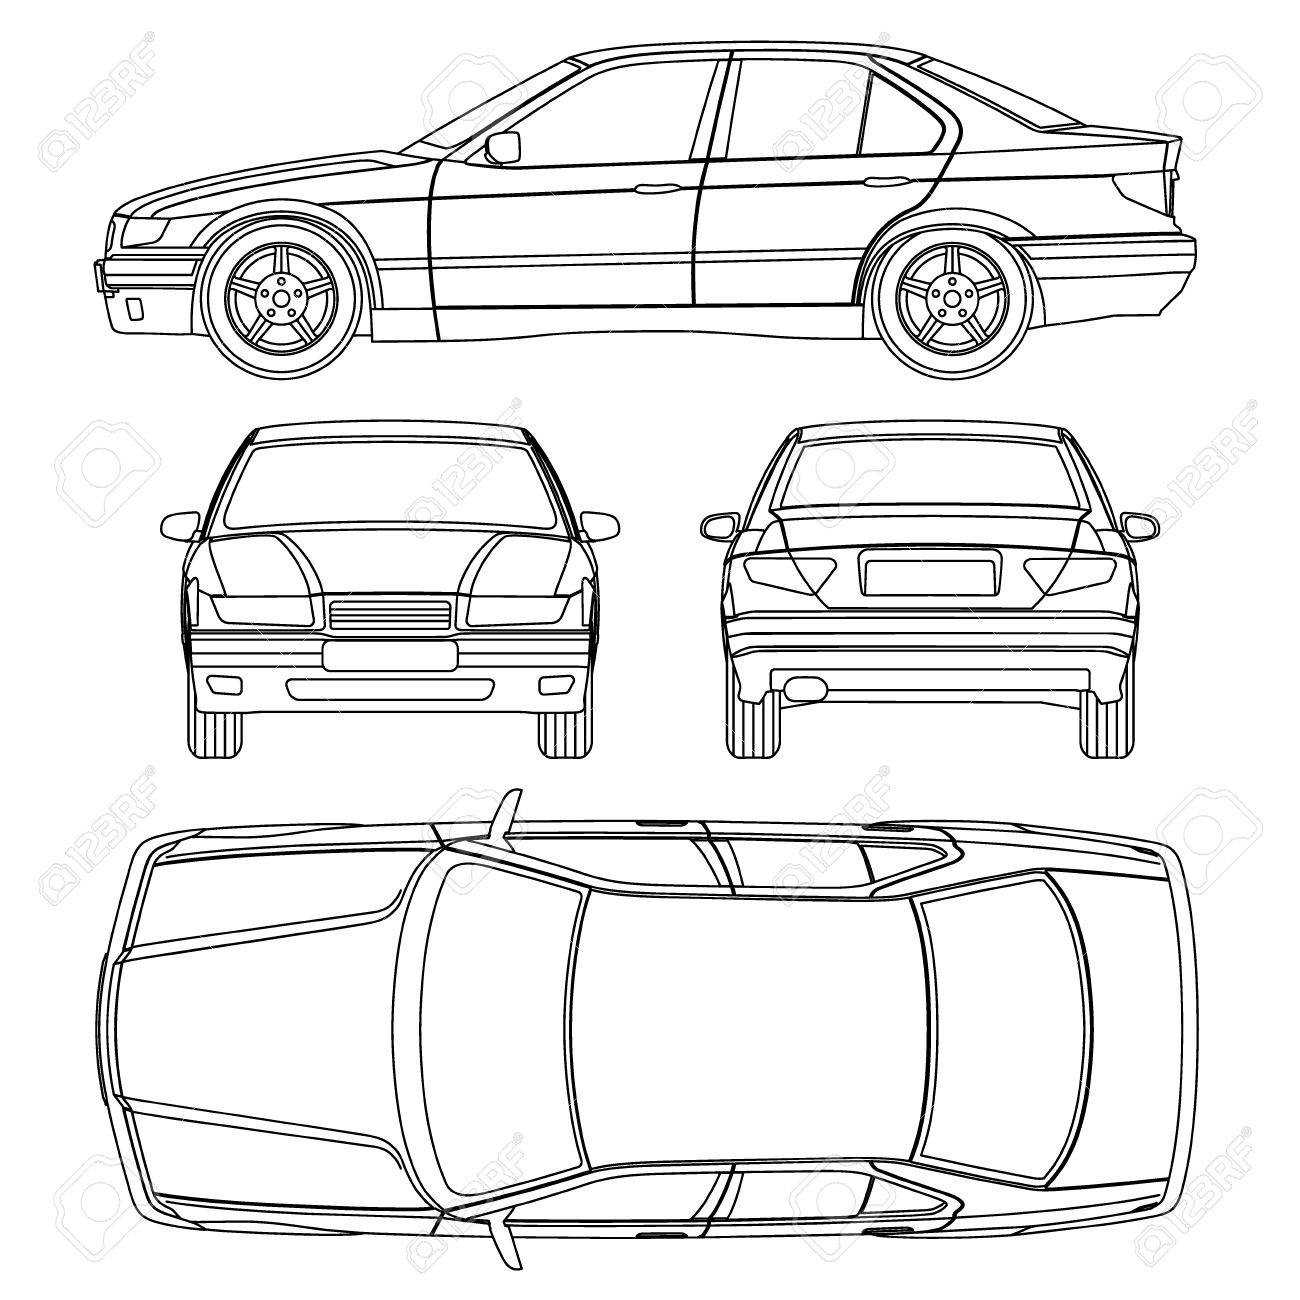 Car Line Draw Insurance Damage, Condition Report Form Pertaining To Car Damage Report Template